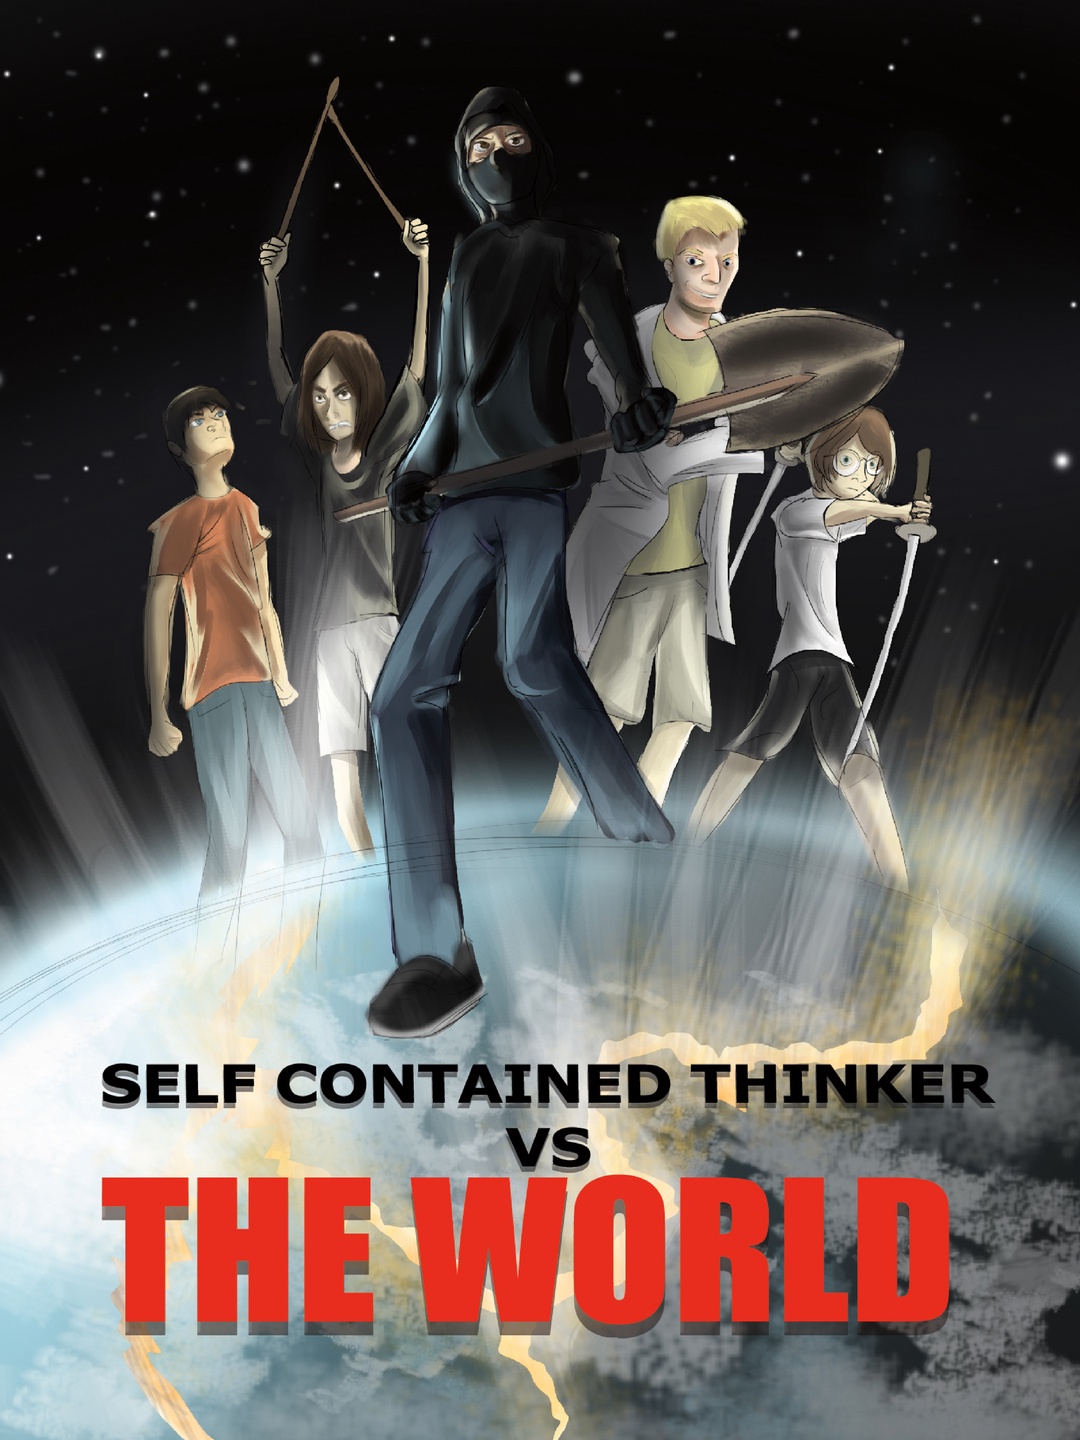 Self Contained Thinker vs the World